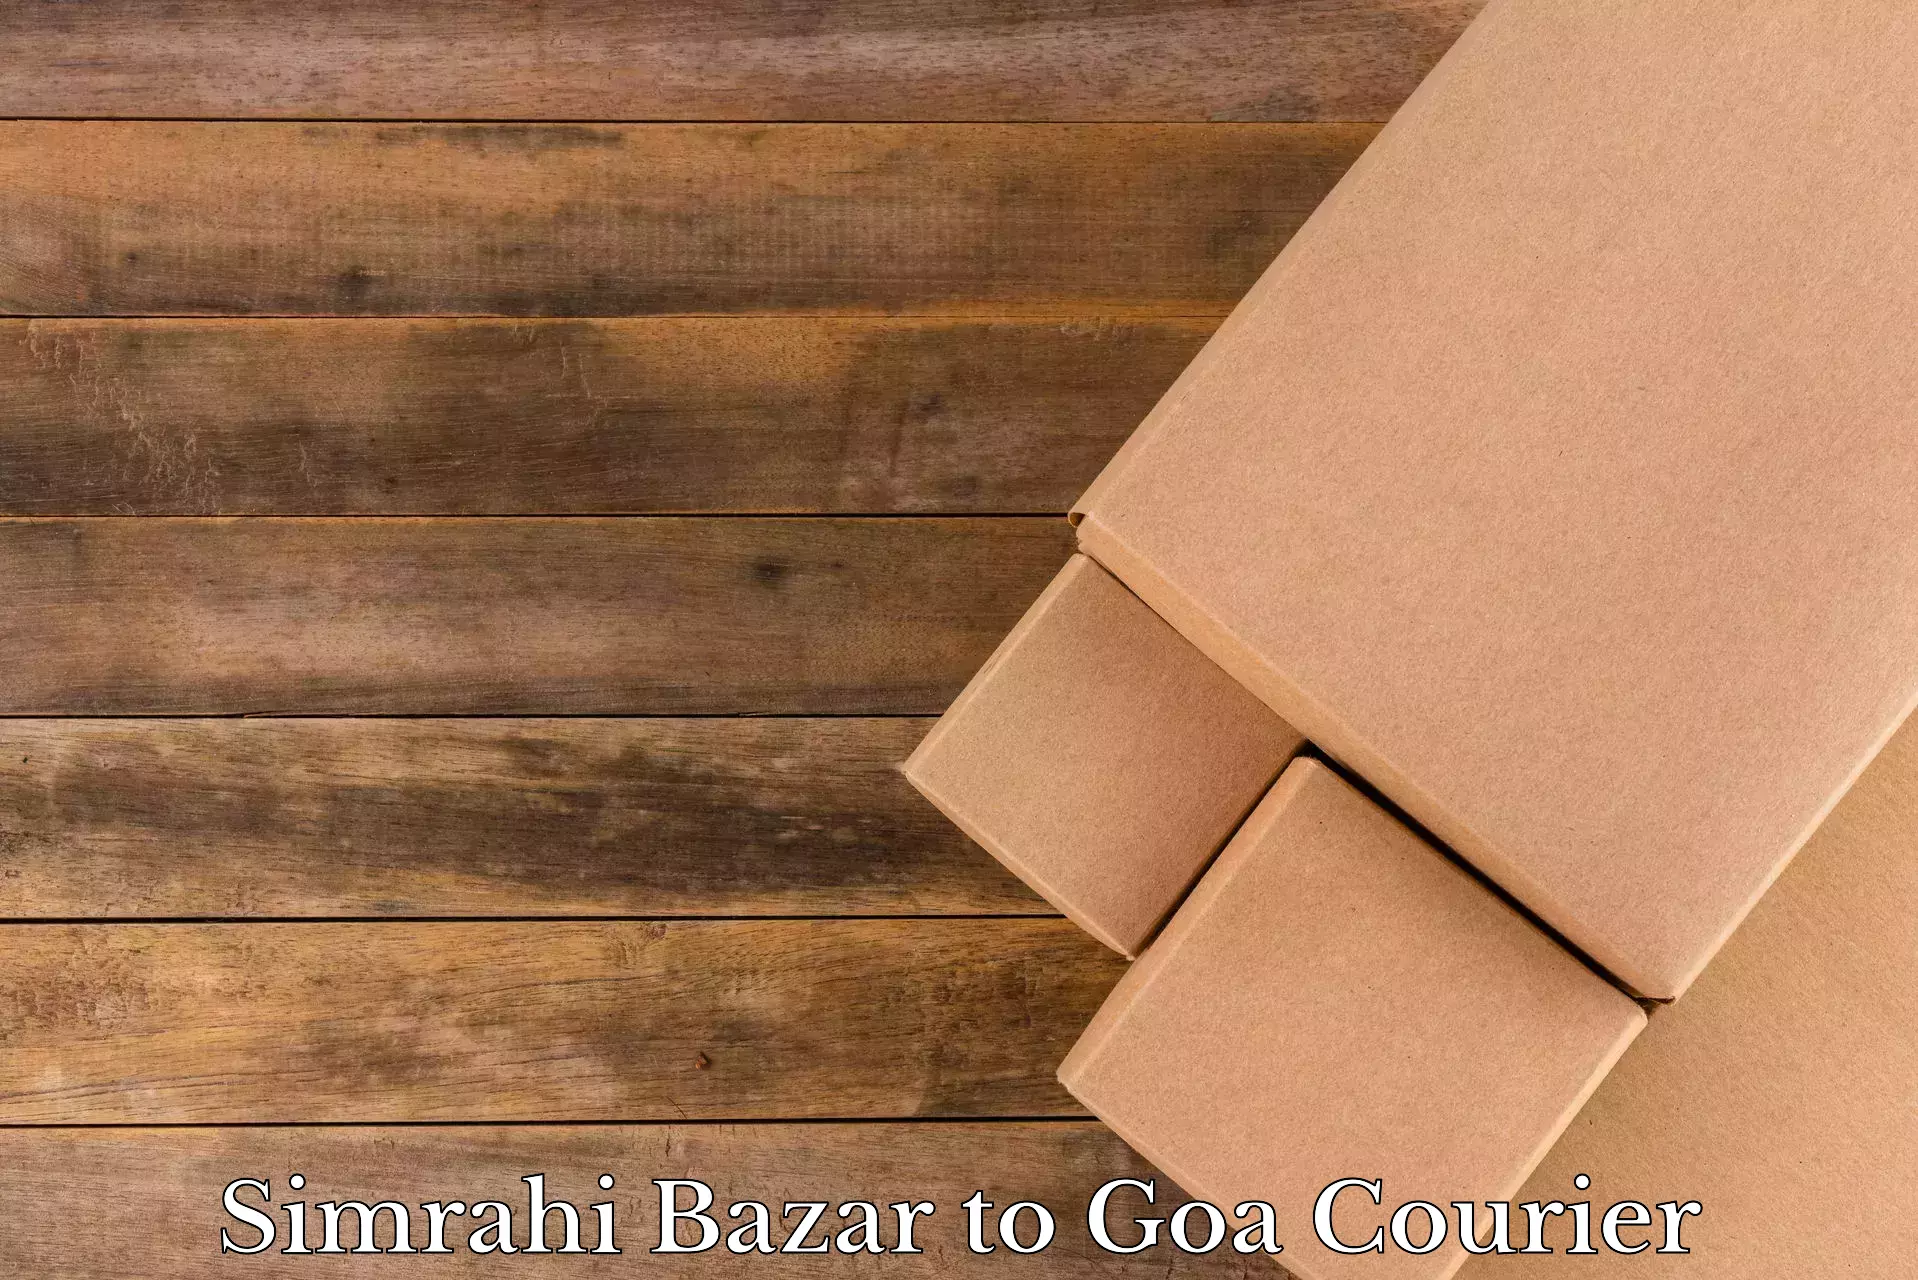 Trusted relocation experts Simrahi Bazar to Panaji